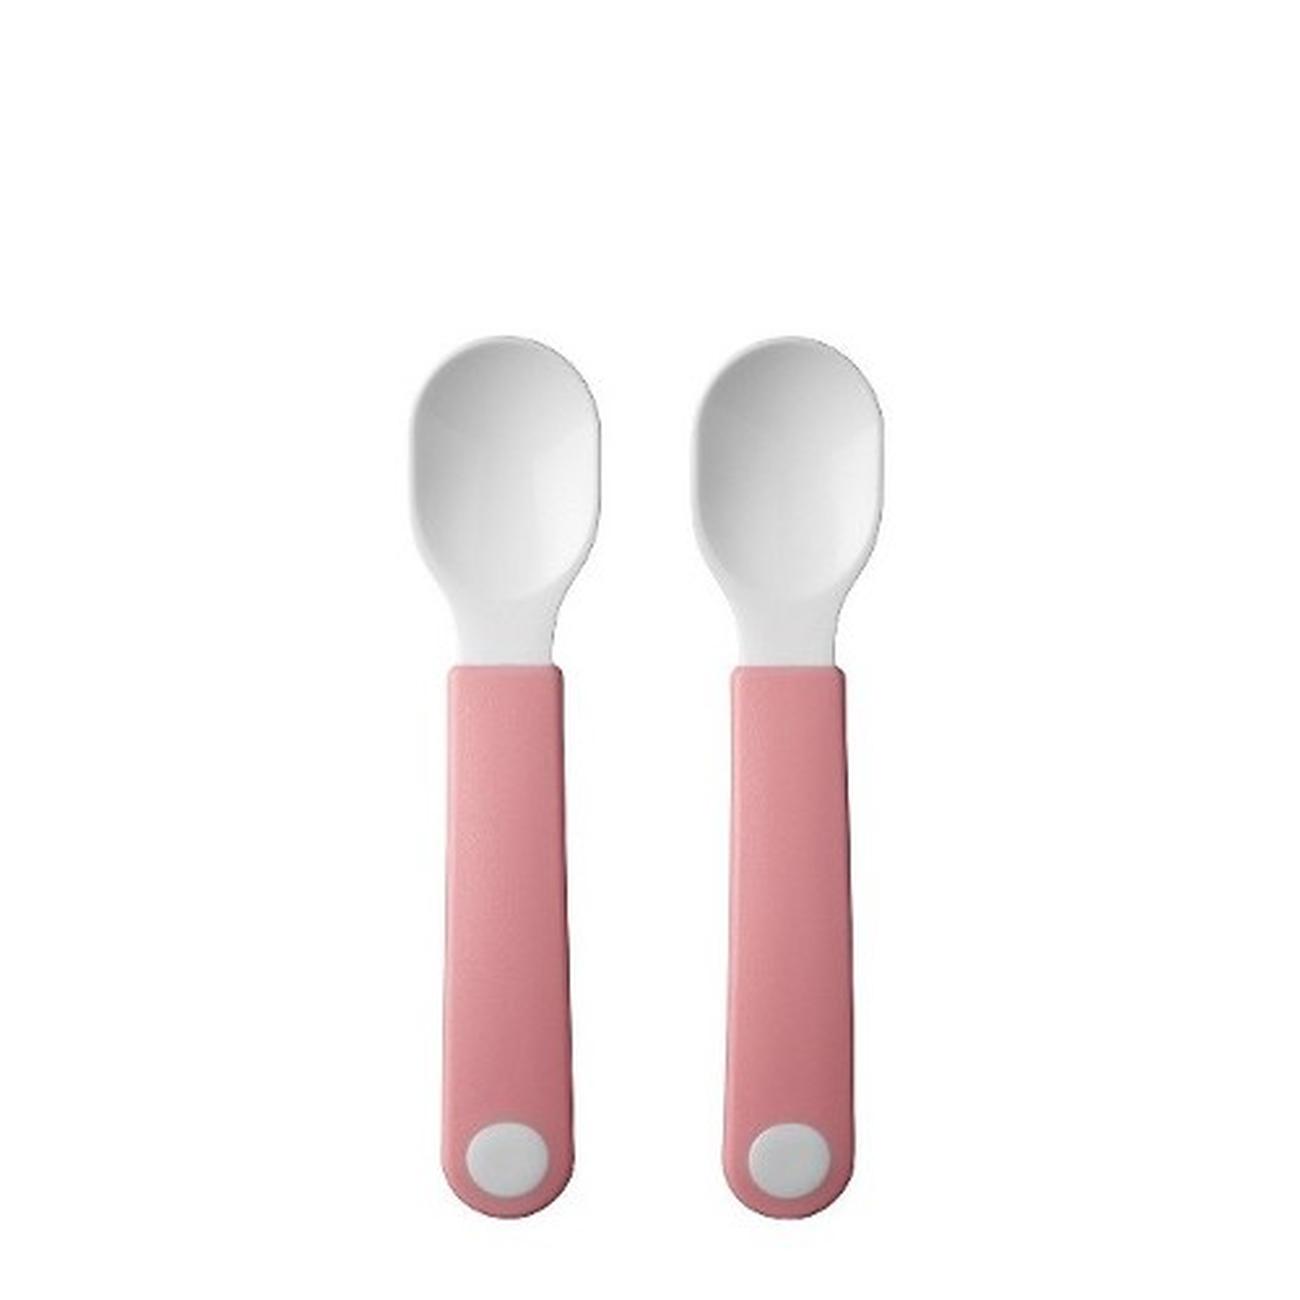 mepal-mio-trainer-spoons-set-of-2-deep-pink - Mepal Mio Practice Spoons 2pc Set Deep Pink